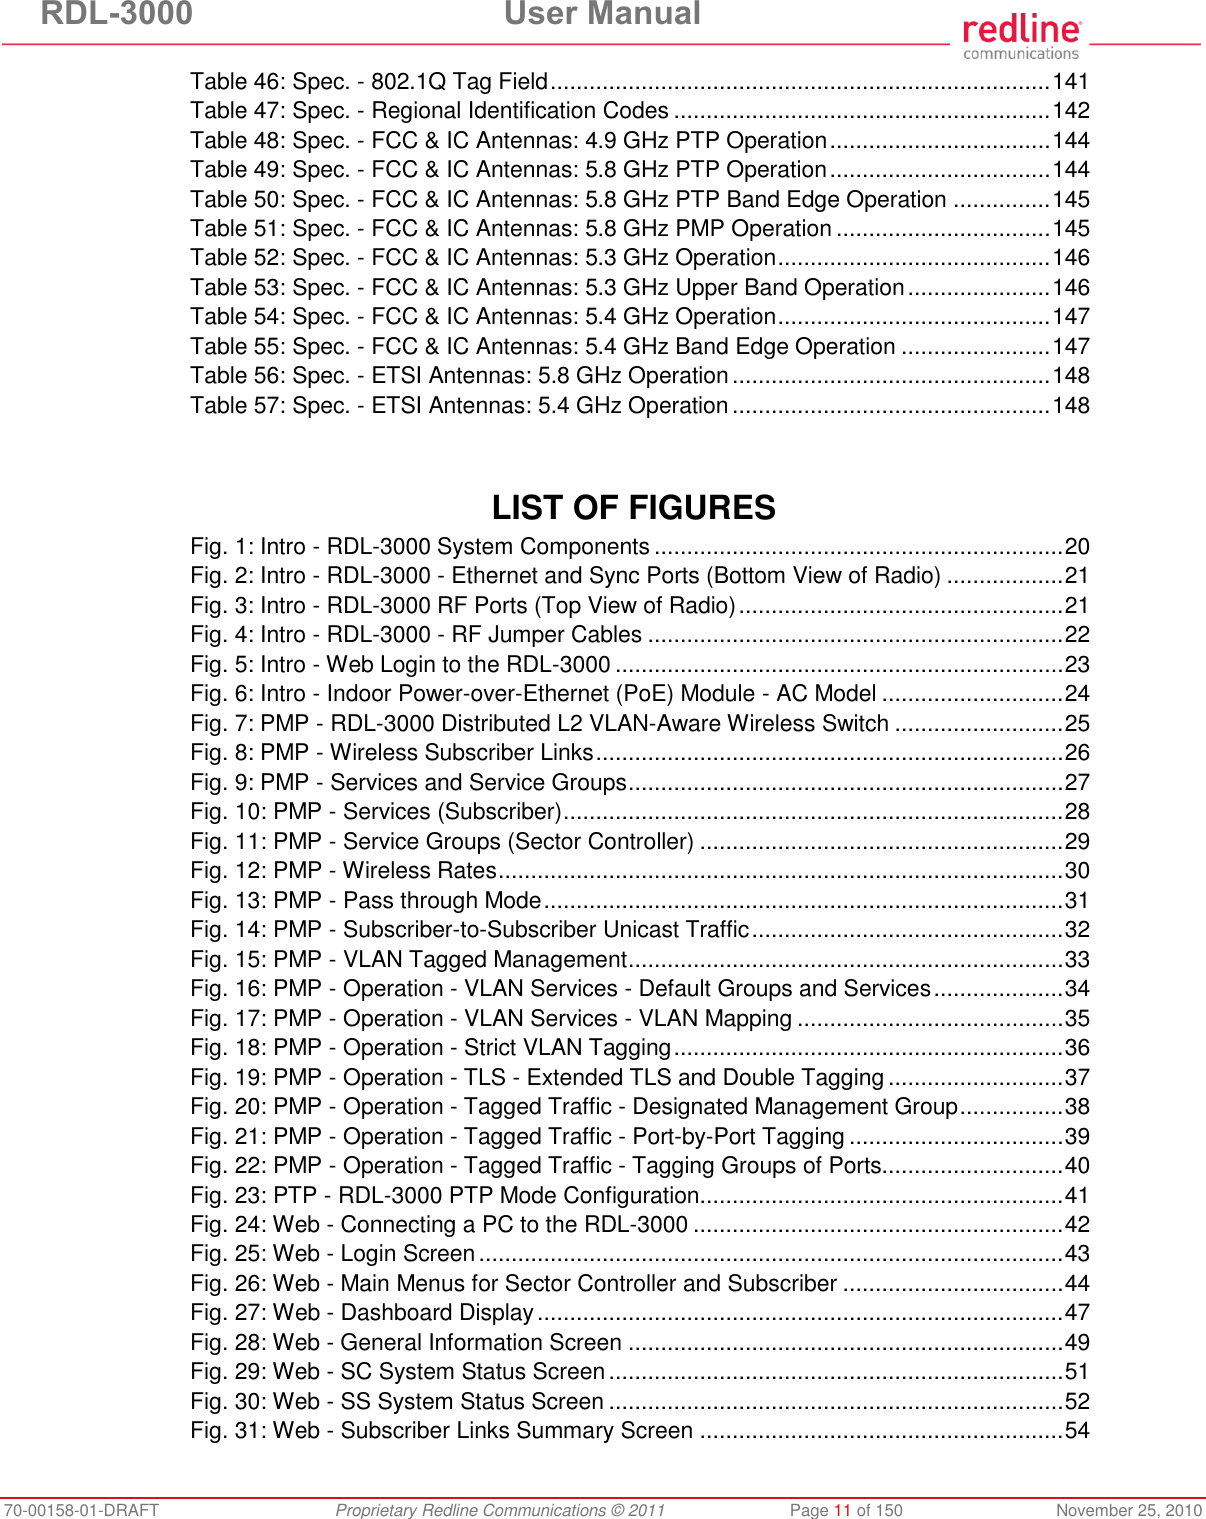 RDL-3000  User Manual 70-00158-01-DRAFT  Proprietary Redline Communications © 2011  Page 11 of 150  November 25, 2010 Table 46: Spec. - 802.1Q Tag Field ............................................................................. 141 Table 47: Spec. - Regional Identification Codes .......................................................... 142 Table 48: Spec. - FCC &amp; IC Antennas: 4.9 GHz PTP Operation .................................. 144 Table 49: Spec. - FCC &amp; IC Antennas: 5.8 GHz PTP Operation .................................. 144 Table 50: Spec. - FCC &amp; IC Antennas: 5.8 GHz PTP Band Edge Operation ............... 145 Table 51: Spec. - FCC &amp; IC Antennas: 5.8 GHz PMP Operation ................................. 145 Table 52: Spec. - FCC &amp; IC Antennas: 5.3 GHz Operation .......................................... 146 Table 53: Spec. - FCC &amp; IC Antennas: 5.3 GHz Upper Band Operation ...................... 146 Table 54: Spec. - FCC &amp; IC Antennas: 5.4 GHz Operation .......................................... 147 Table 55: Spec. - FCC &amp; IC Antennas: 5.4 GHz Band Edge Operation ....................... 147 Table 56: Spec. - ETSI Antennas: 5.8 GHz Operation ................................................. 148 Table 57: Spec. - ETSI Antennas: 5.4 GHz Operation ................................................. 148    LIST OF FIGURES Fig. 1: Intro - RDL-3000 System Components ............................................................... 20 Fig. 2: Intro - RDL-3000 - Ethernet and Sync Ports (Bottom View of Radio) .................. 21 Fig. 3: Intro - RDL-3000 RF Ports (Top View of Radio) .................................................. 21 Fig. 4: Intro - RDL-3000 - RF Jumper Cables ................................................................ 22 Fig. 5: Intro - Web Login to the RDL-3000 ..................................................................... 23 Fig. 6: Intro - Indoor Power-over-Ethernet (PoE) Module - AC Model ............................ 24 Fig. 7: PMP - RDL-3000 Distributed L2 VLAN-Aware Wireless Switch .......................... 25 Fig. 8: PMP - Wireless Subscriber Links ........................................................................ 26 Fig. 9: PMP - Services and Service Groups ................................................................... 27 Fig. 10: PMP - Services (Subscriber) ............................................................................. 28 Fig. 11: PMP - Service Groups (Sector Controller) ........................................................ 29 Fig. 12: PMP - Wireless Rates ....................................................................................... 30 Fig. 13: PMP - Pass through Mode ................................................................................ 31 Fig. 14: PMP - Subscriber-to-Subscriber Unicast Traffic ................................................ 32 Fig. 15: PMP - VLAN Tagged Management ................................................................... 33 Fig. 16: PMP - Operation - VLAN Services - Default Groups and Services .................... 34 Fig. 17: PMP - Operation - VLAN Services - VLAN Mapping ......................................... 35 Fig. 18: PMP - Operation - Strict VLAN Tagging ............................................................ 36 Fig. 19: PMP - Operation - TLS - Extended TLS and Double Tagging ........................... 37 Fig. 20: PMP - Operation - Tagged Traffic - Designated Management Group ................ 38 Fig. 21: PMP - Operation - Tagged Traffic - Port-by-Port Tagging ................................. 39 Fig. 22: PMP - Operation - Tagged Traffic - Tagging Groups of Ports............................ 40 Fig. 23: PTP - RDL-3000 PTP Mode Configuration........................................................ 41 Fig. 24: Web - Connecting a PC to the RDL-3000 ......................................................... 42 Fig. 25: Web - Login Screen .......................................................................................... 43 Fig. 26: Web - Main Menus for Sector Controller and Subscriber .................................. 44 Fig. 27: Web - Dashboard Display ................................................................................. 47 Fig. 28: Web - General Information Screen ................................................................... 49 Fig. 29: Web - SC System Status Screen ...................................................................... 51 Fig. 30: Web - SS System Status Screen ...................................................................... 52 Fig. 31: Web - Subscriber Links Summary Screen ........................................................ 54 